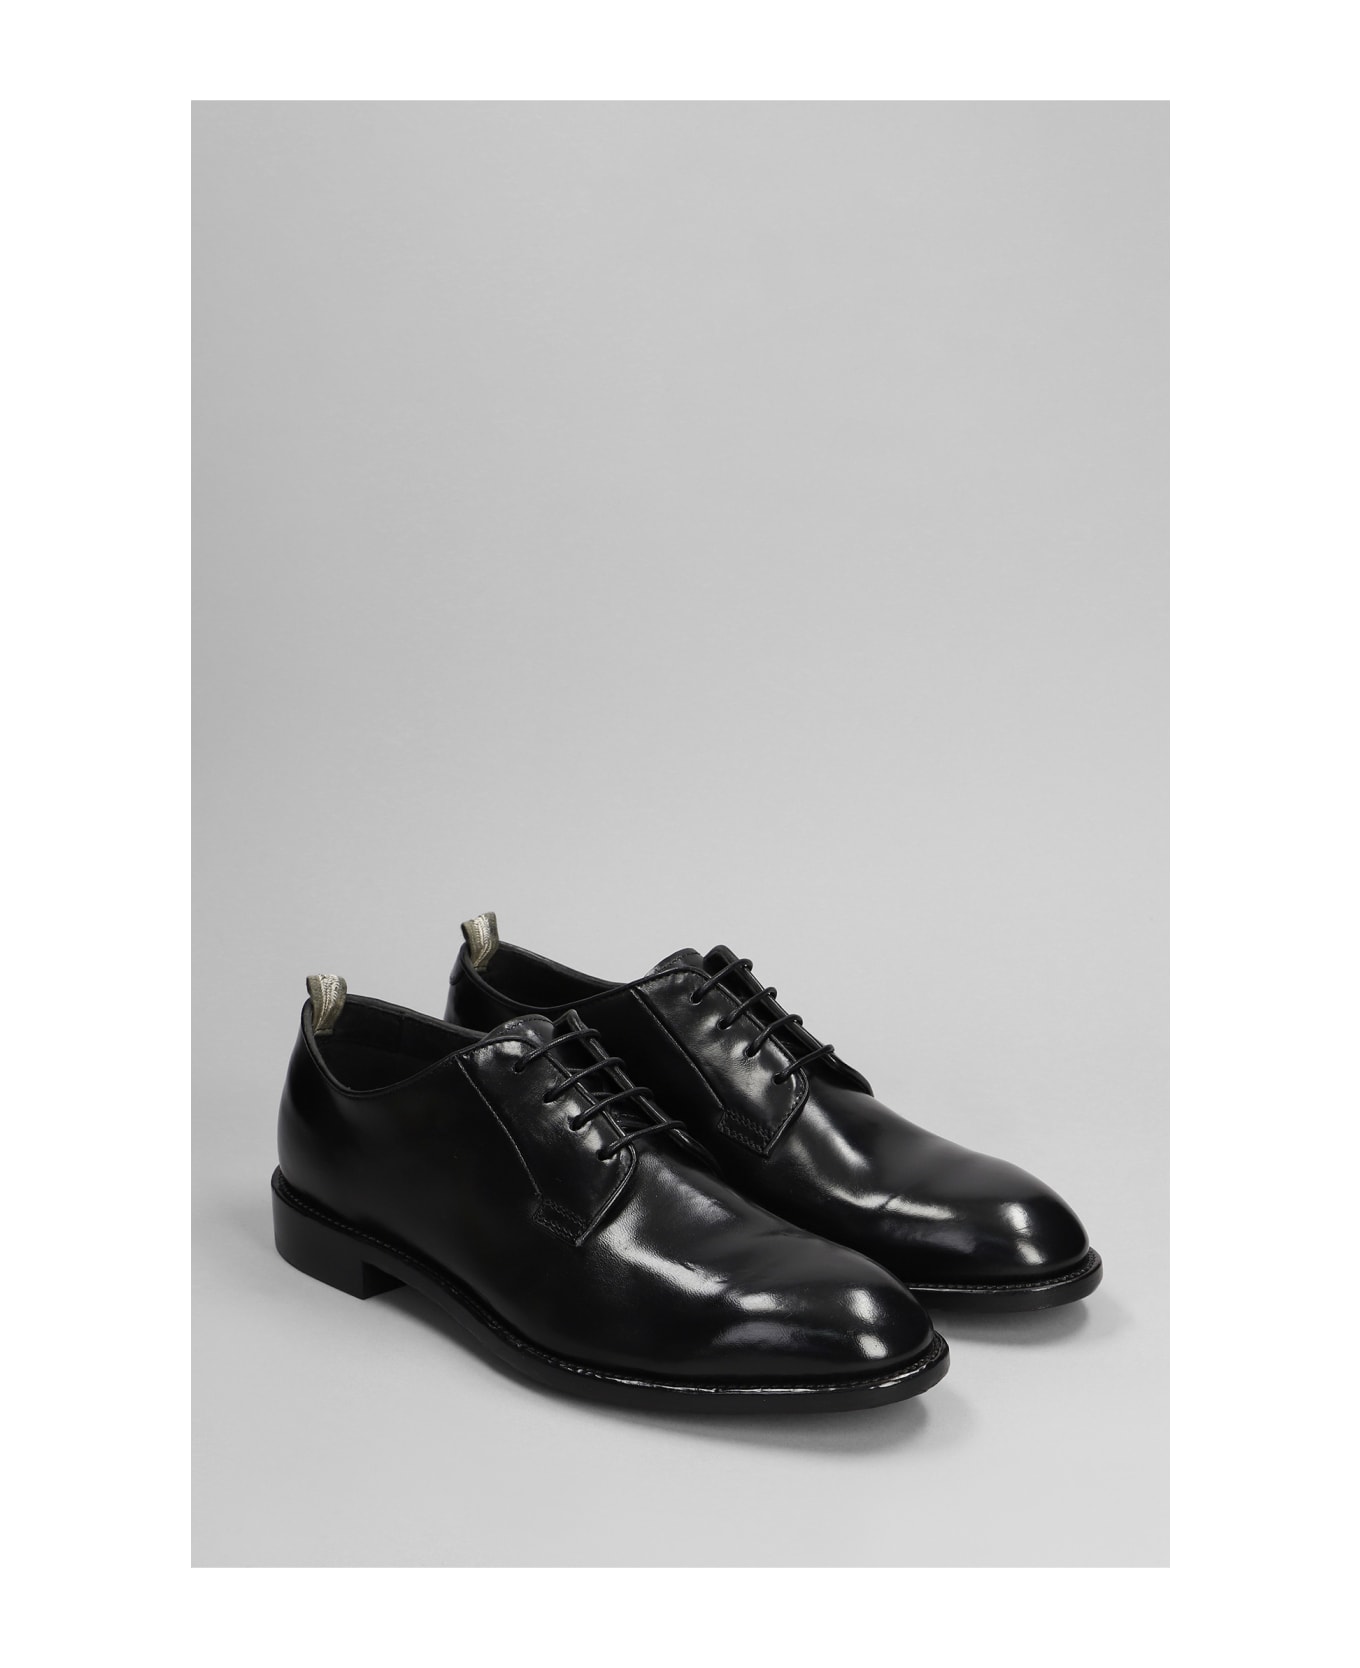 Officine Creative Signature 001 Lace Up Shoes In Black Leather - black ローファー＆デッキシューズ